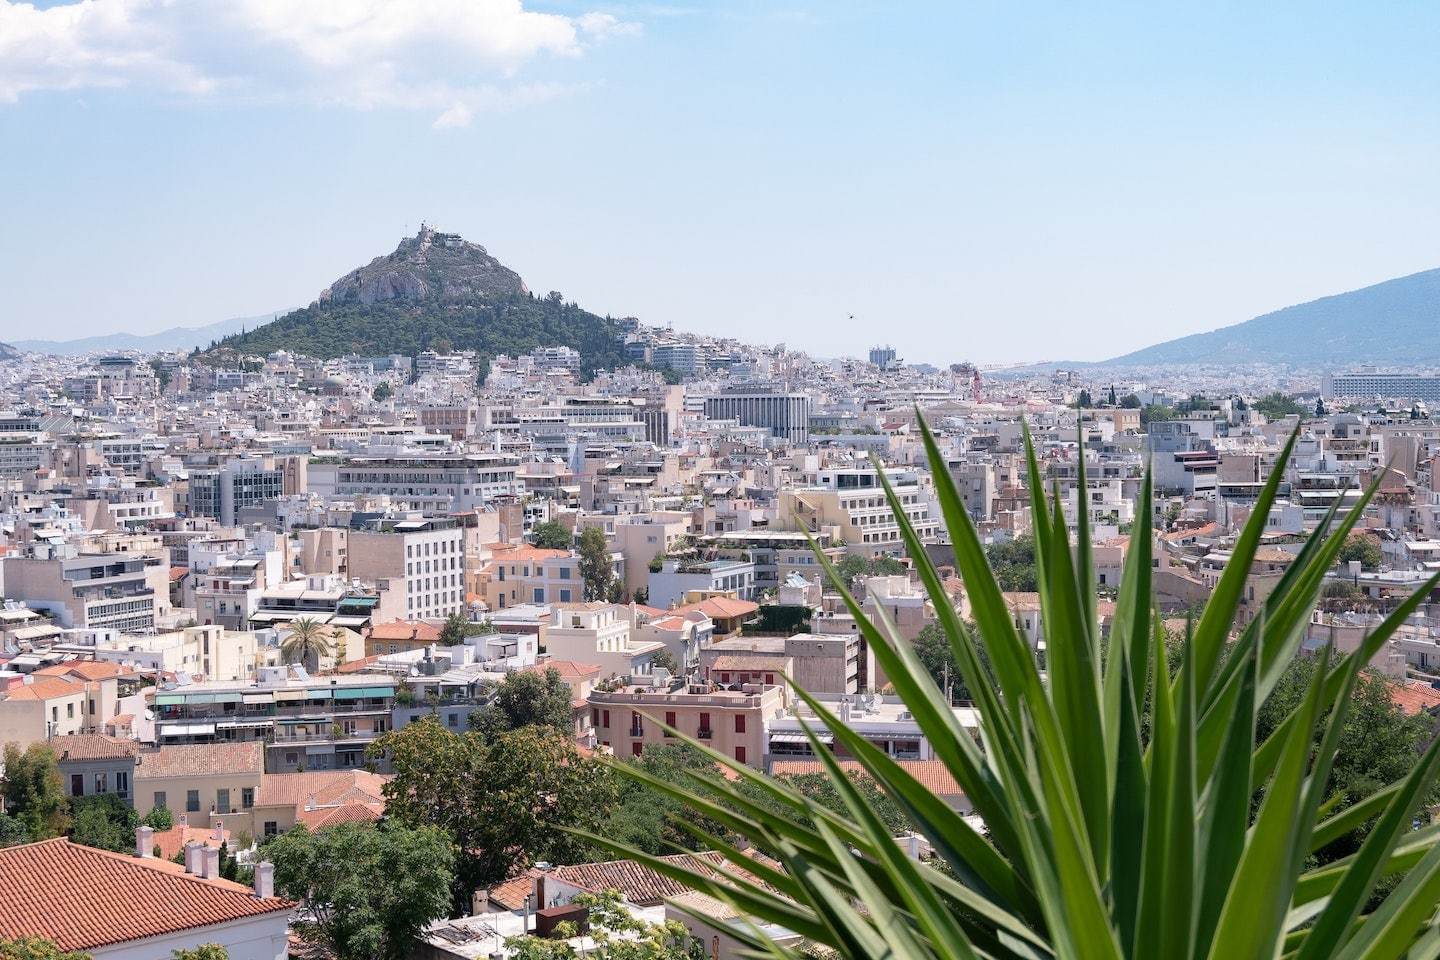 View of Athens, Greece with a giant mountain behind